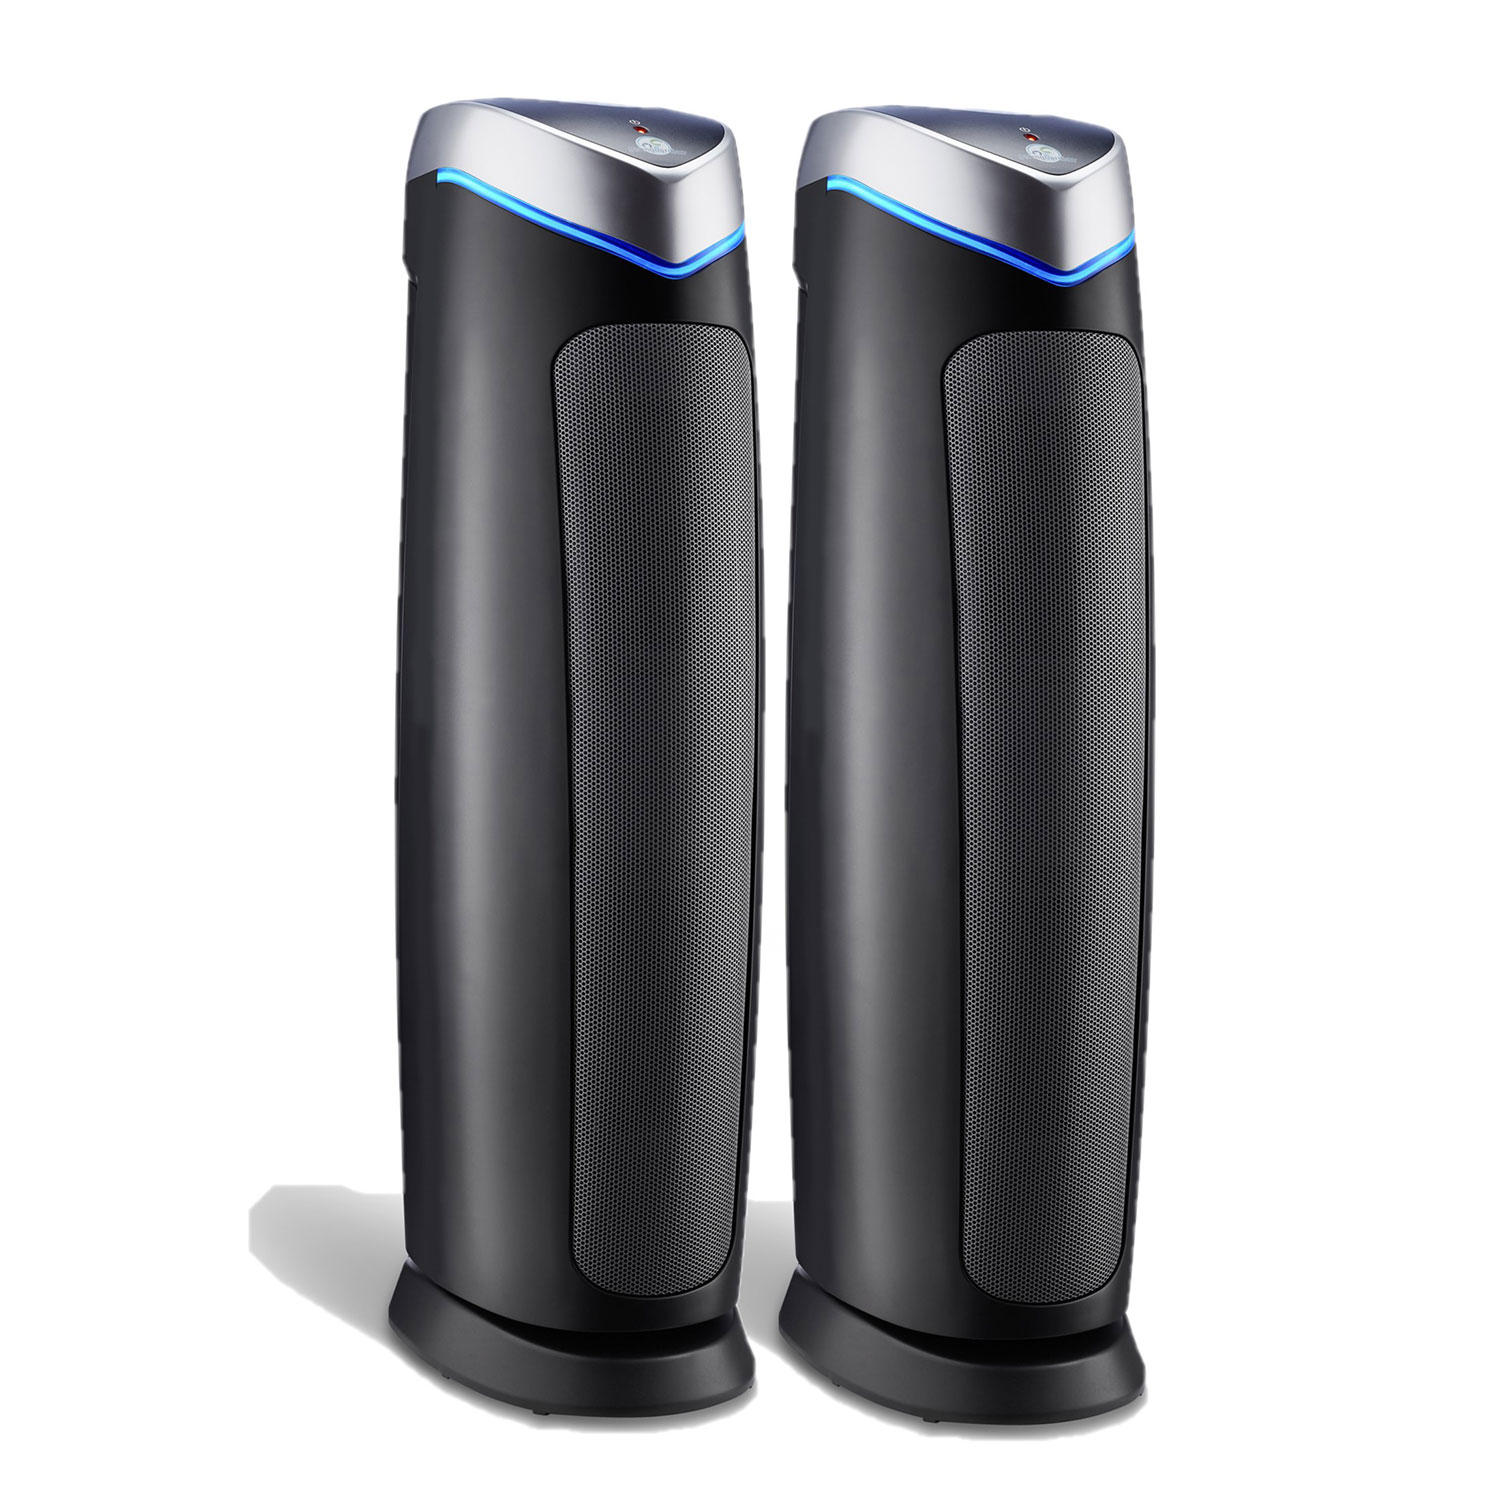 Germ Guardian 5-in-1 Air Purifier With Pet Pure True HEPA Filter, UVC Sanitizer, Odor Reduction – 2 Pack